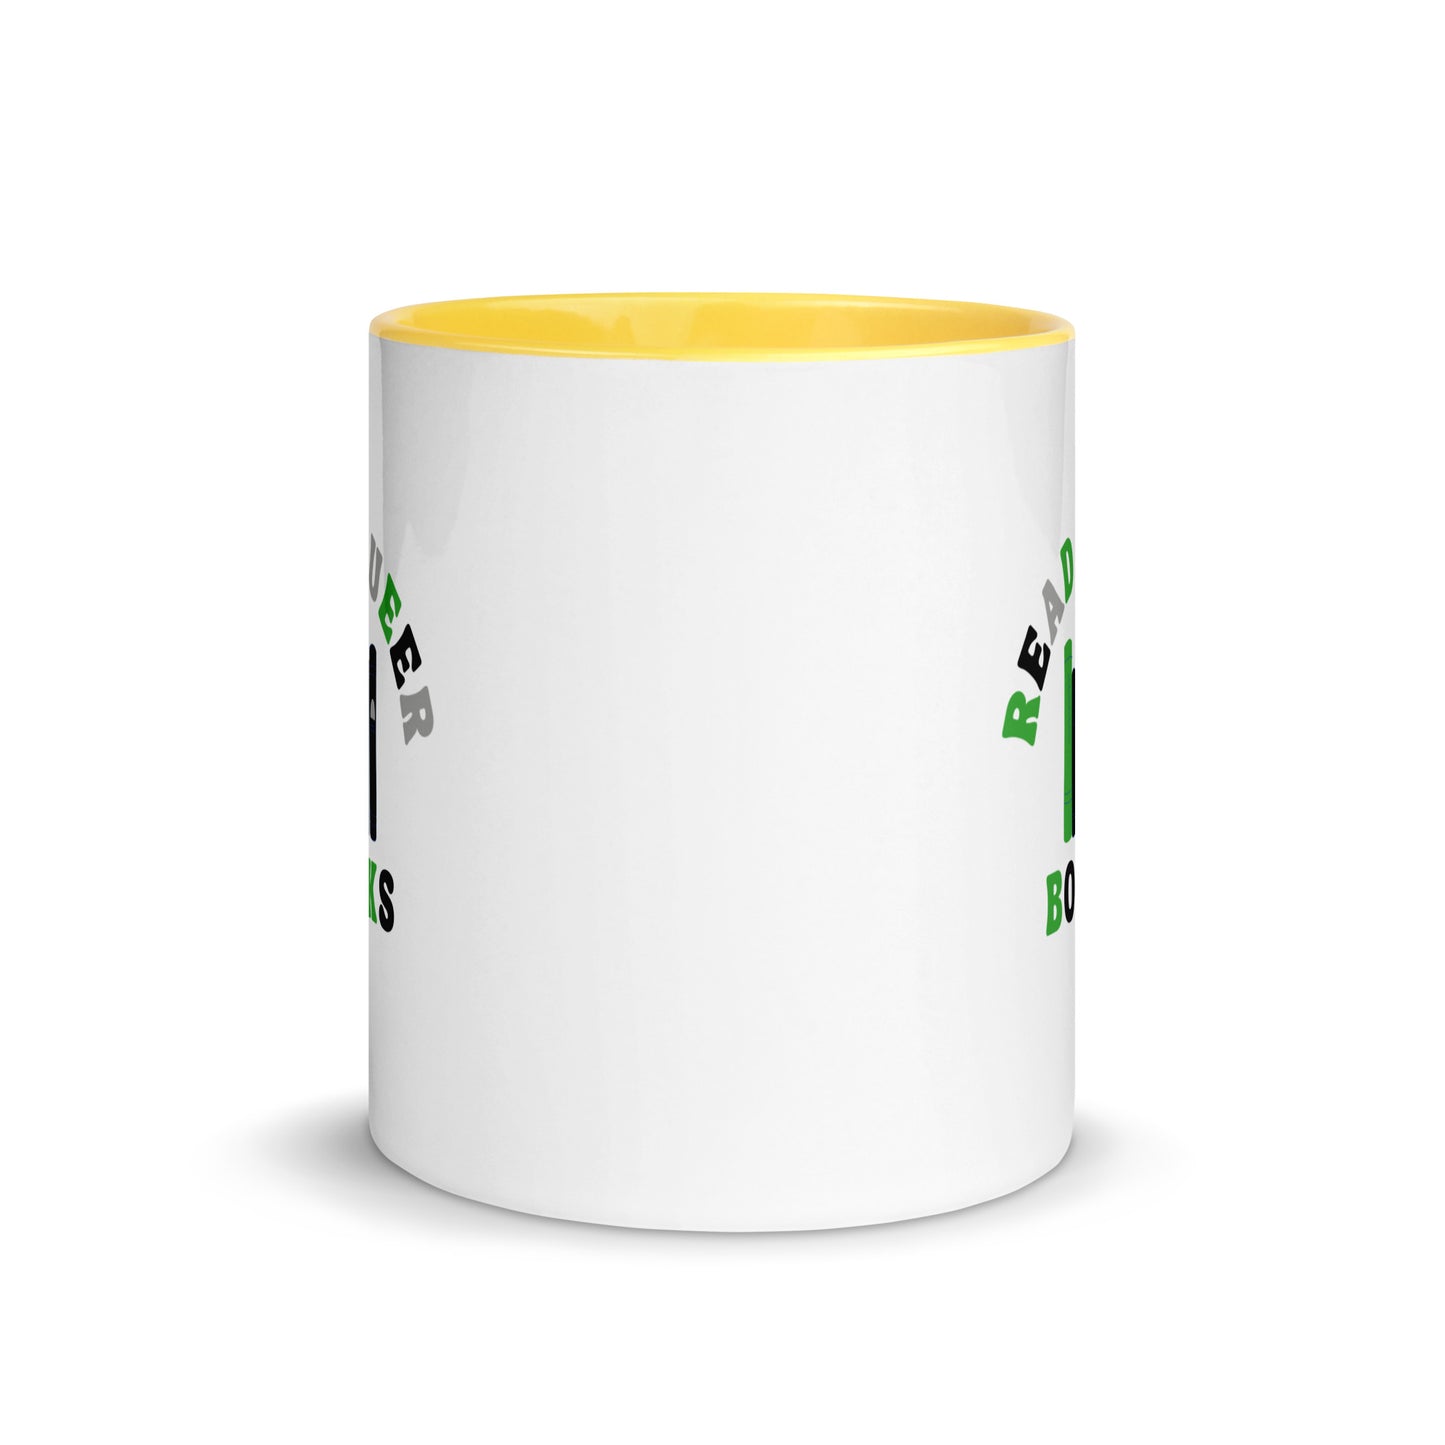 Read Queer Books (Aromantic Colors) Mug with Color Inside